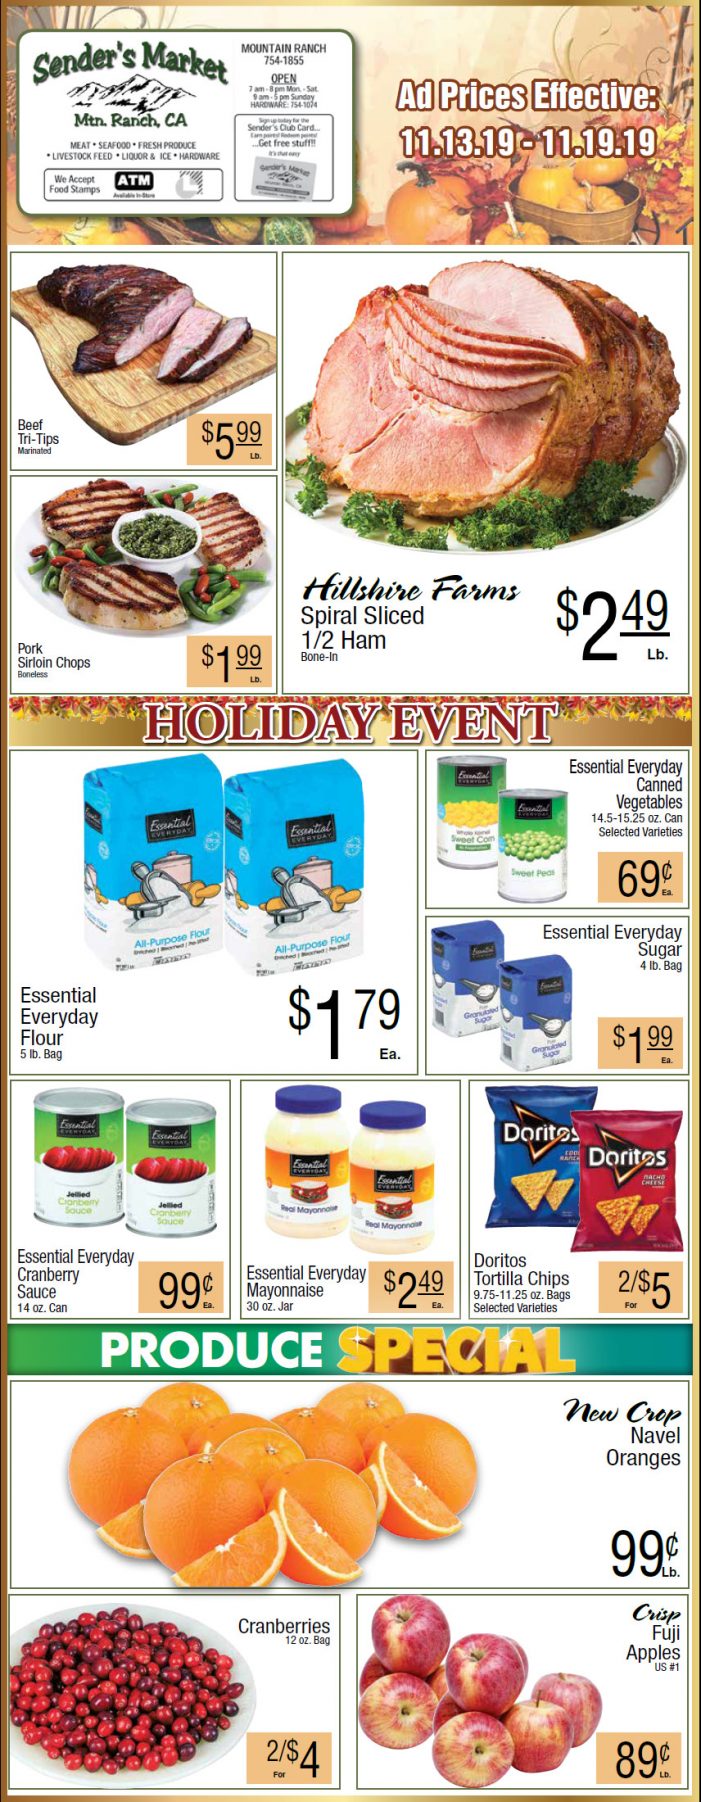 Sender’s Market Weekly Ad & Grocery Specials Through November 19th